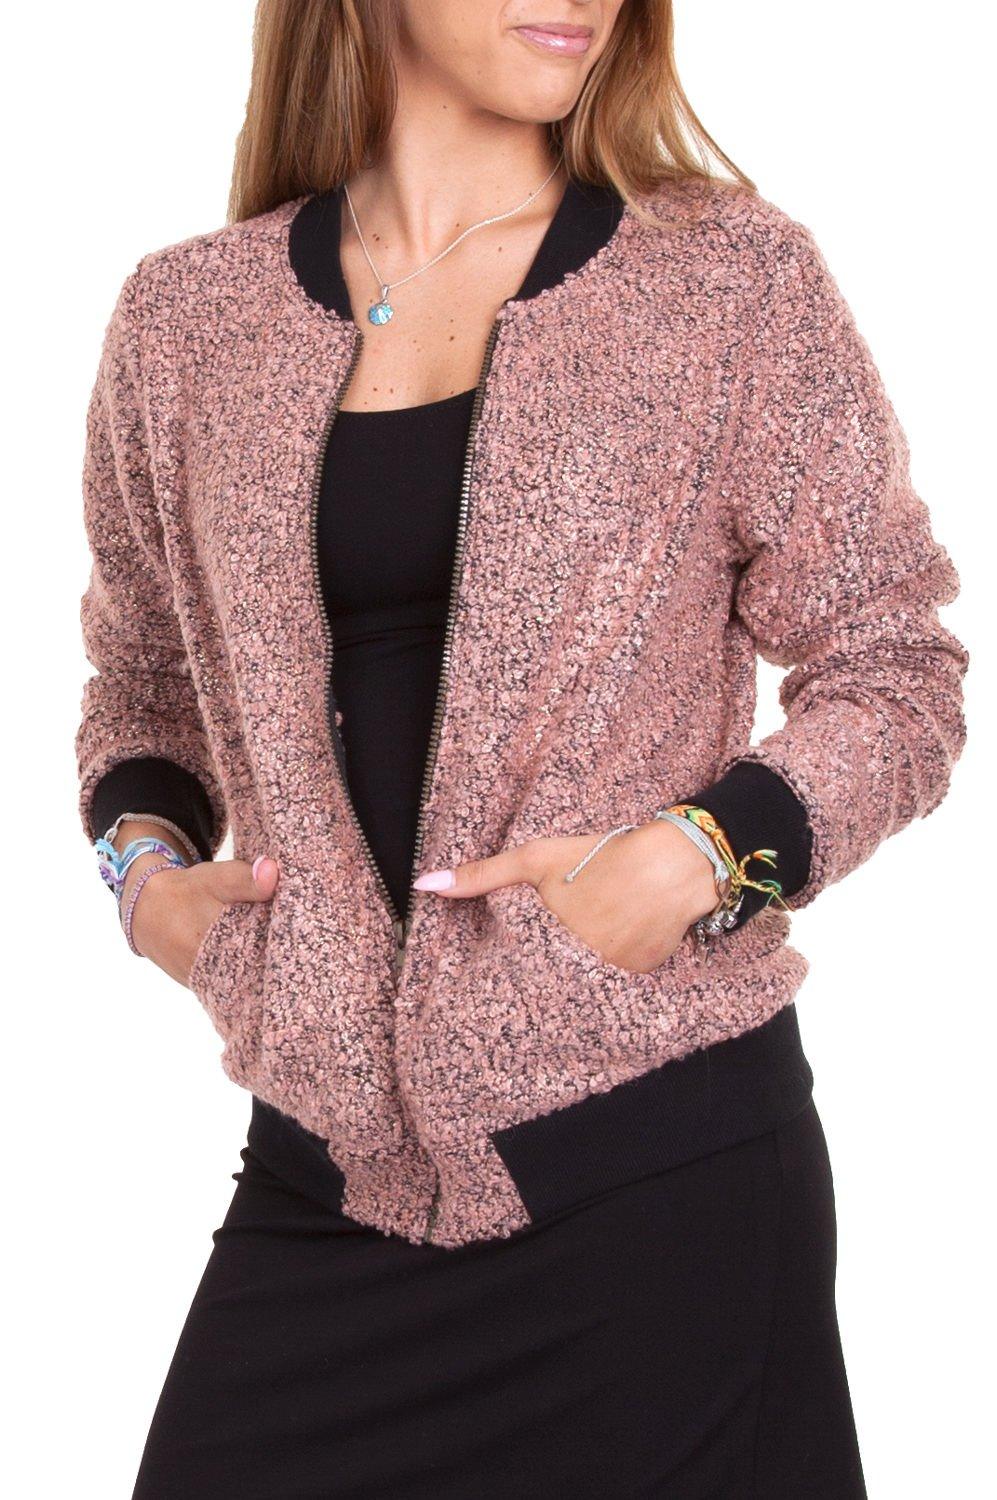 Jalie 3675 - CHARLIE - Bomber Jacket in a boucle knit